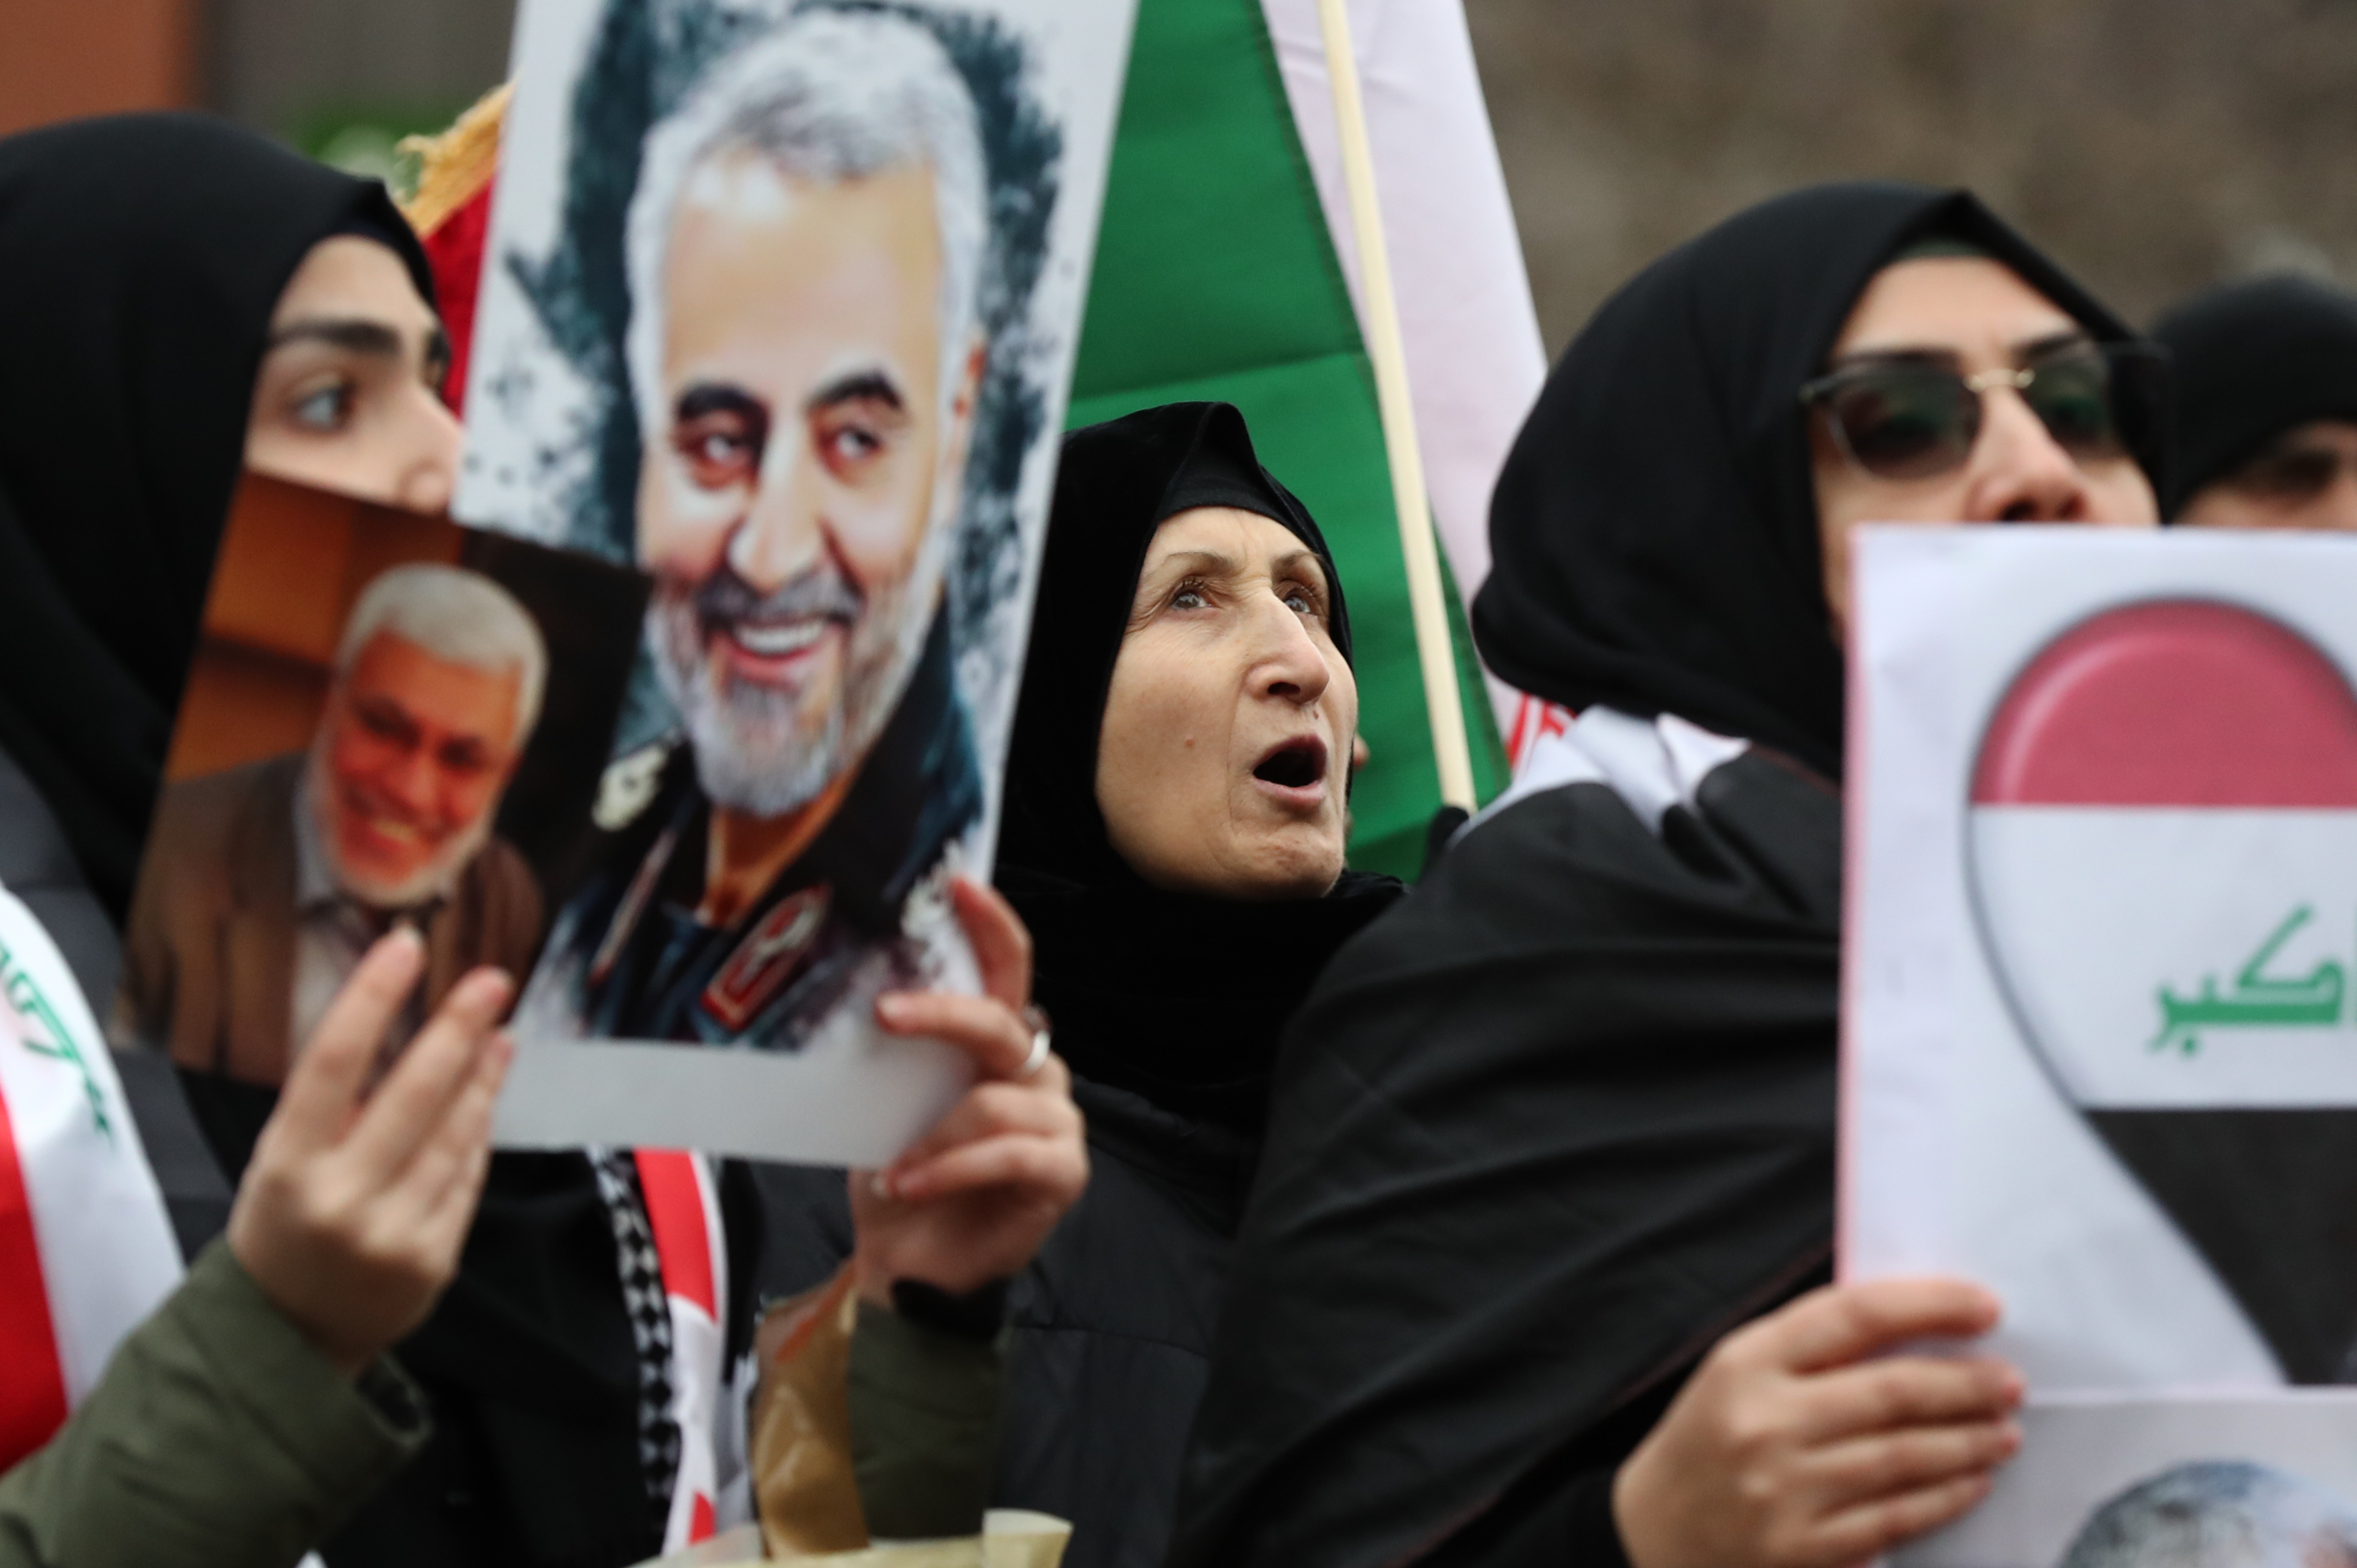 Protesters demonstrate outside the US Embassy in Nine Elms, London, after the US killed the head of Tehran's elite Quds Force and Iran's top general, General Qassem Soleimani, in a drone strike at Baghdad's international airport.